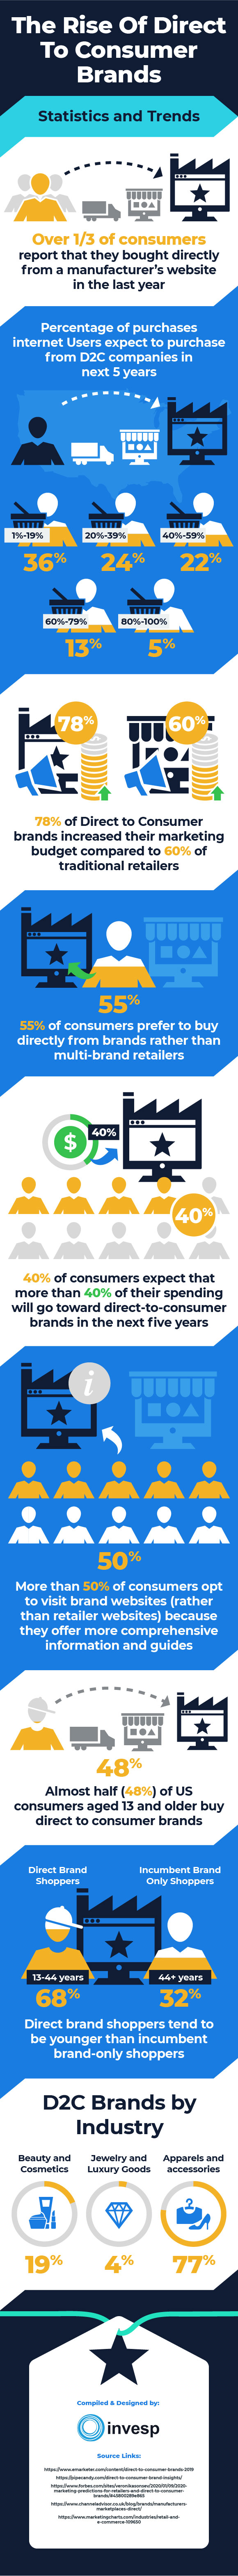 The Rise of Direct to consumer brands – Statistics and Trends